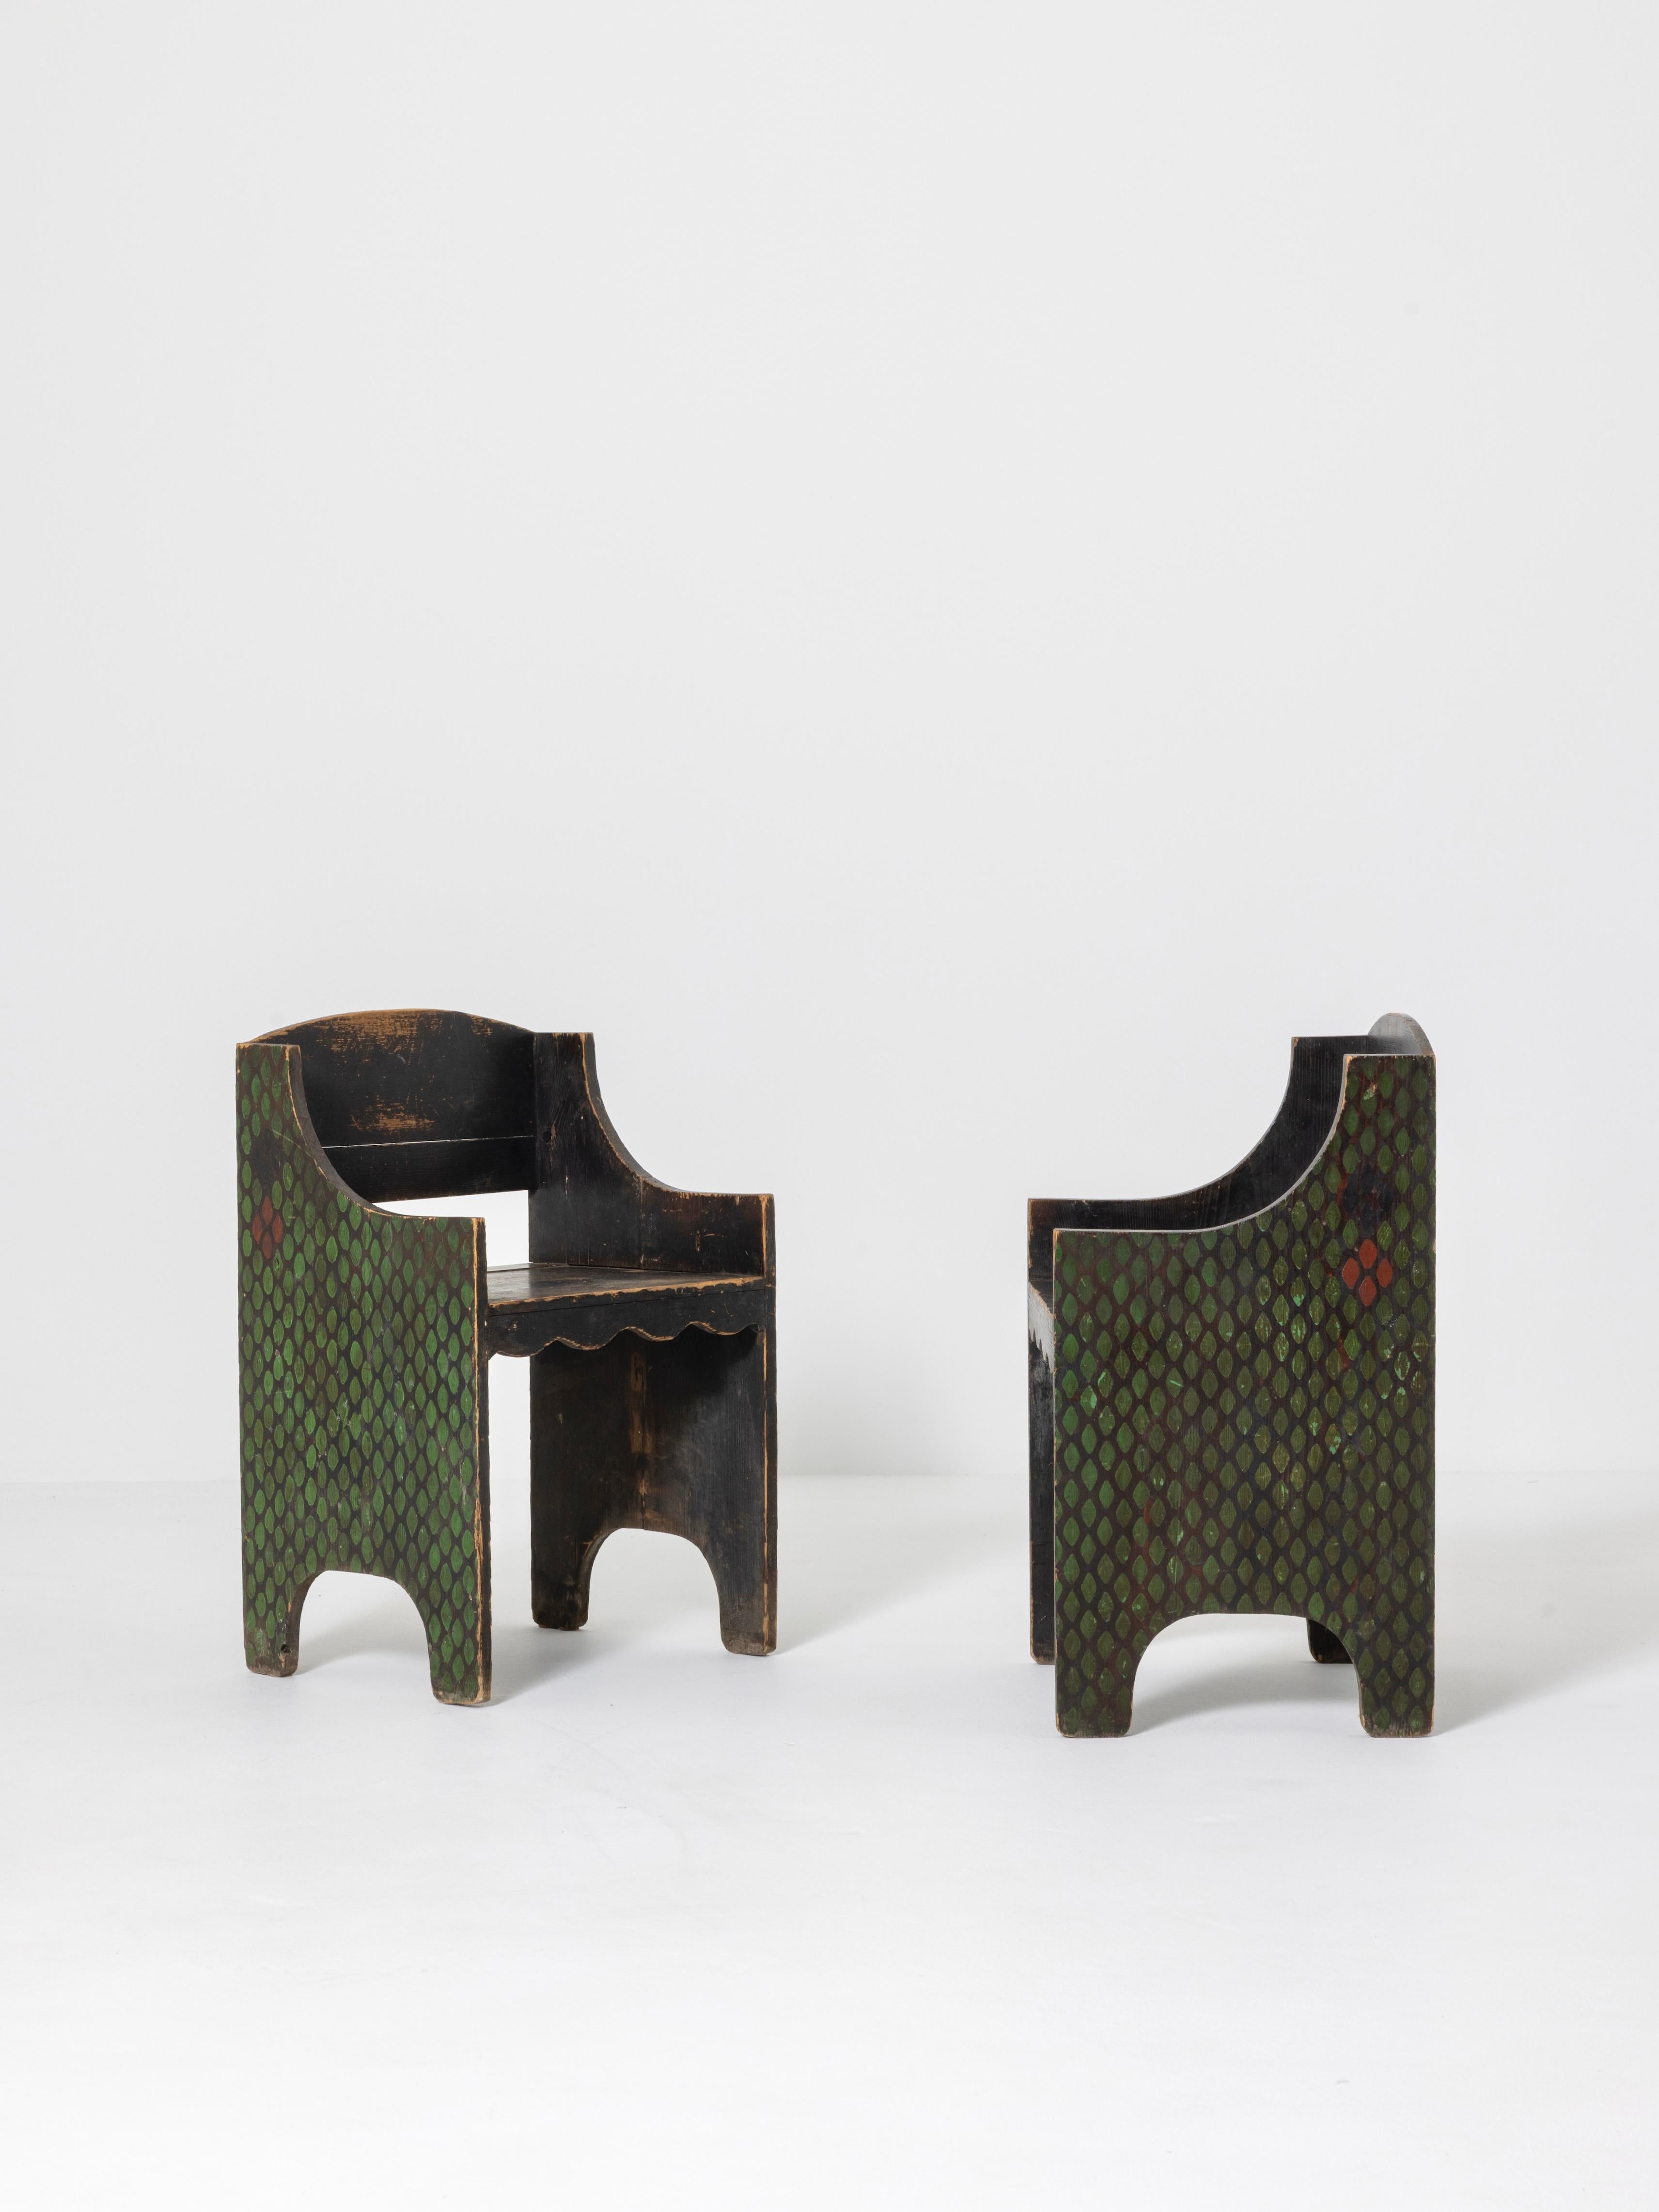 Italian Vittorio Zecchin Pair of Armchairs from Early 1920s, Italy For Sale